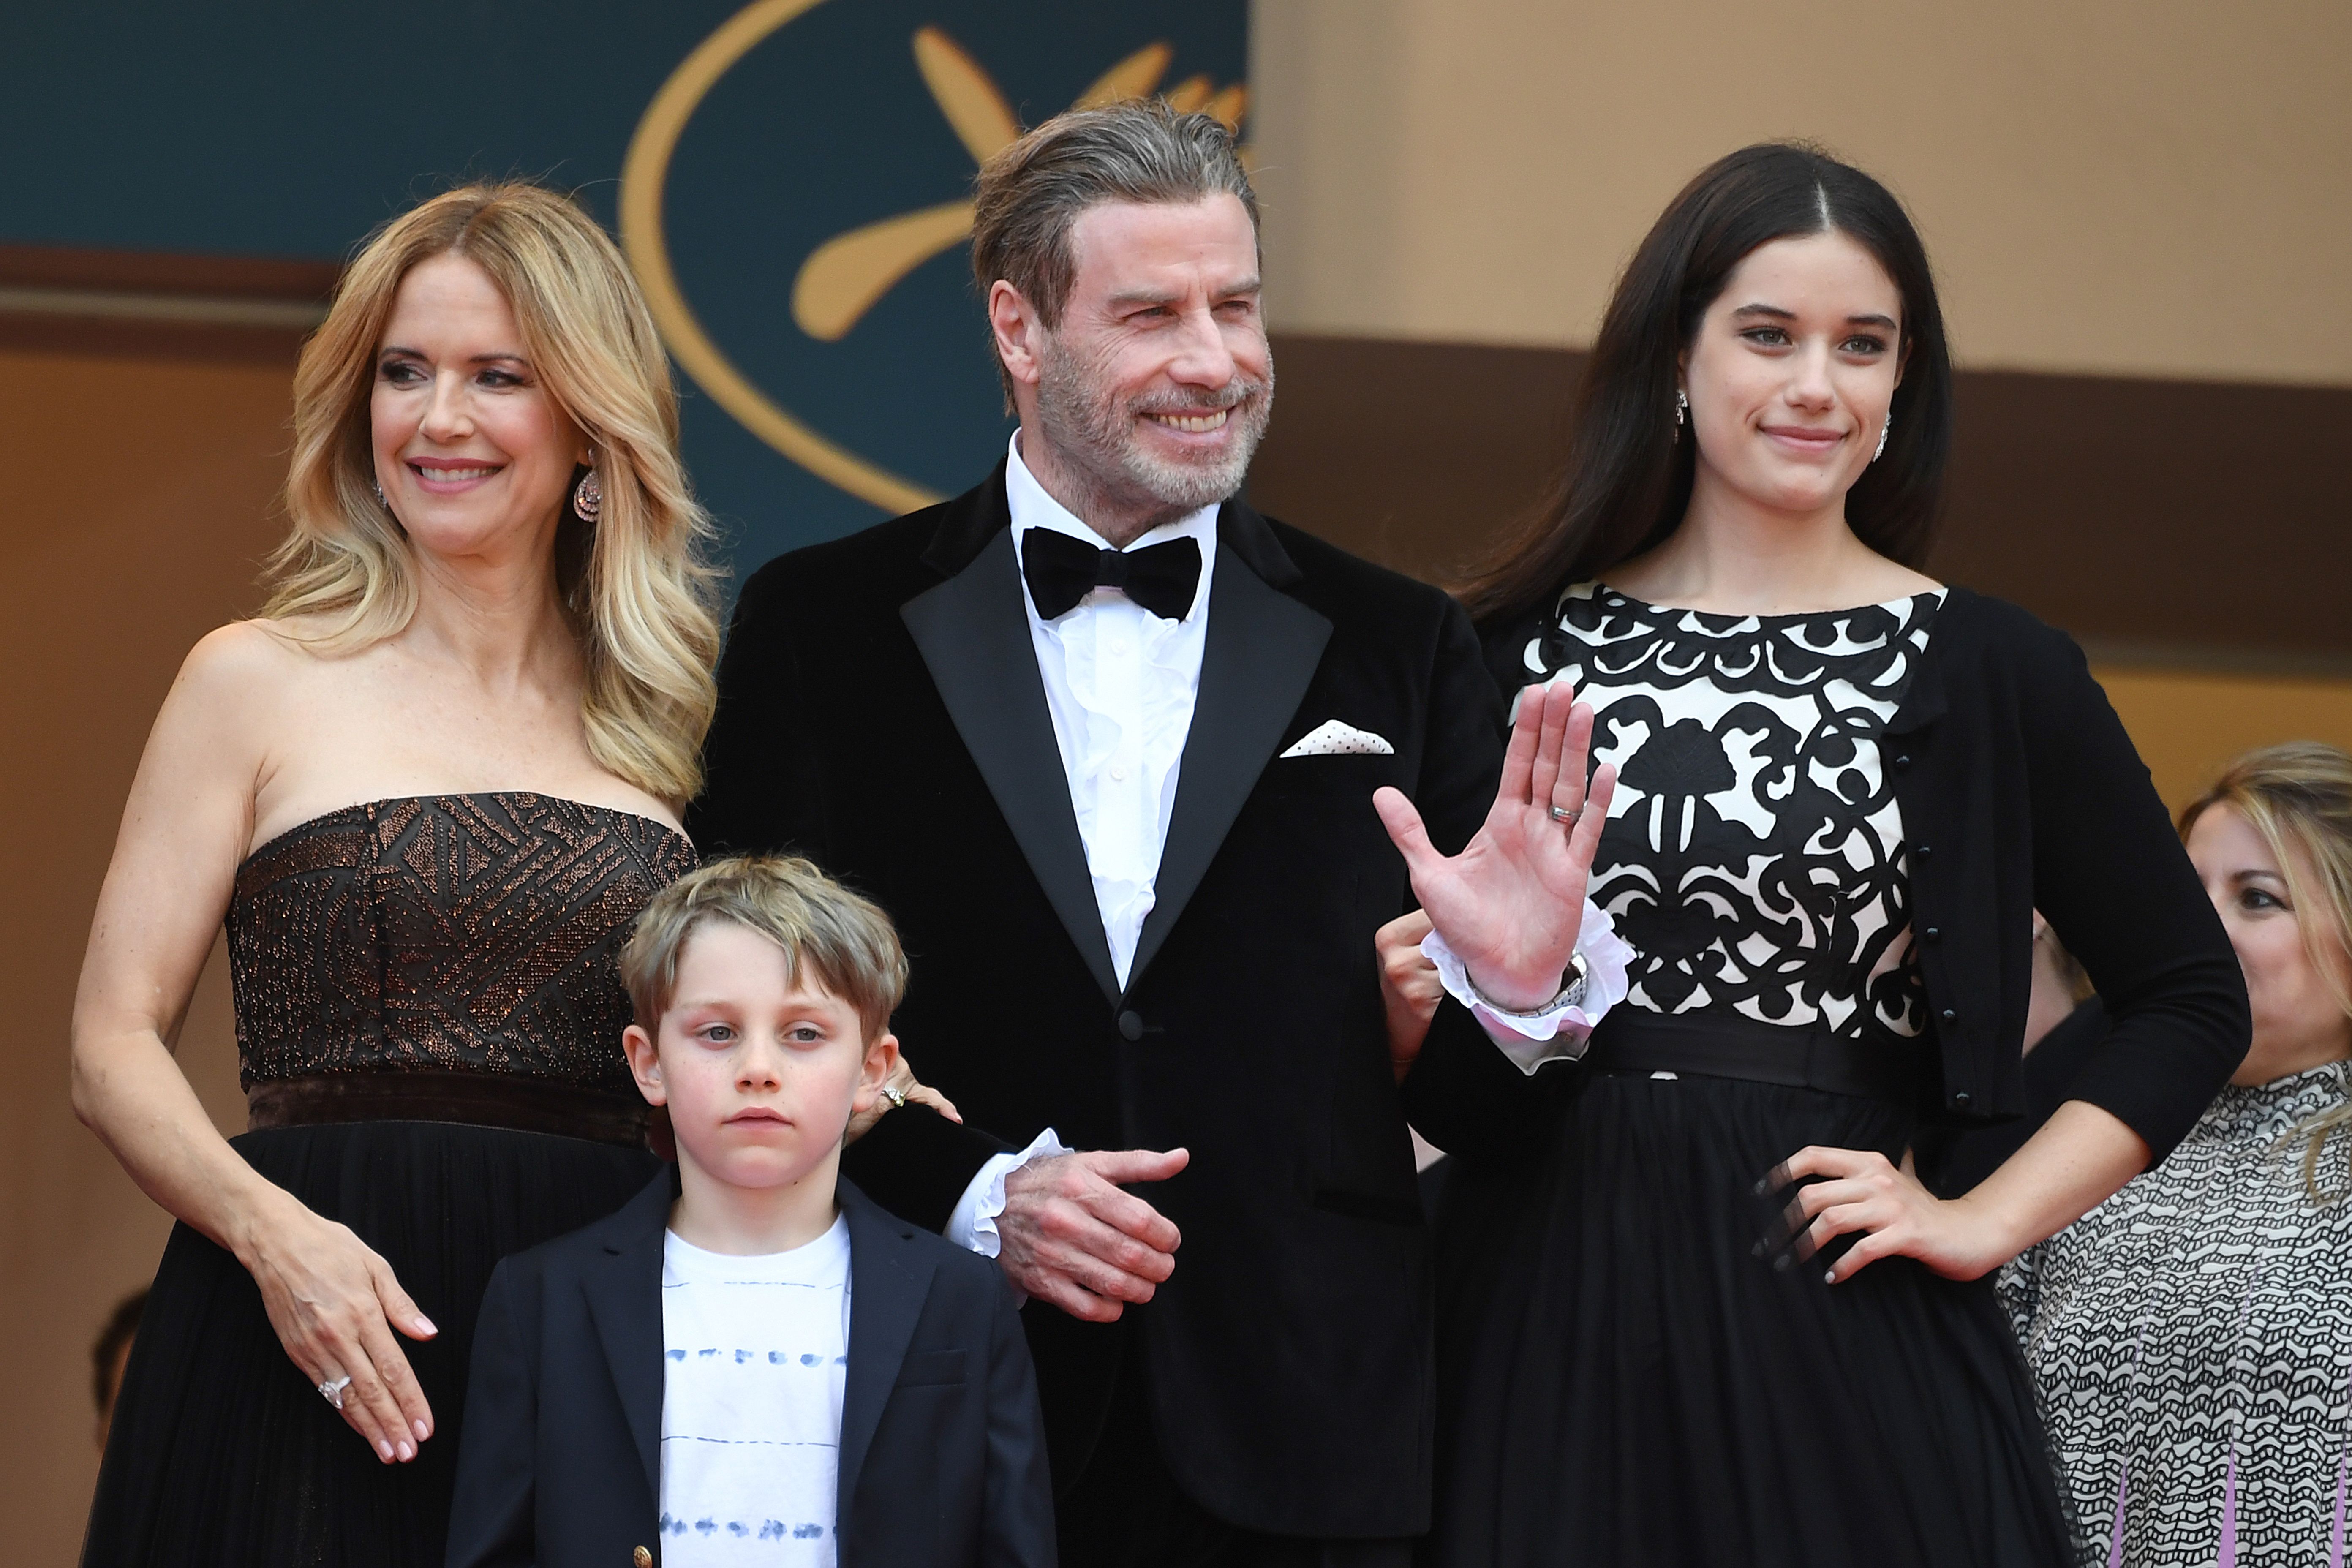 John Travolta, Kelly Preston, and their children Ella Bleu Travolta and Benjamin Travolta pose as they arrive on May 15, 2018, for the screening of the film "Solo: A Star Wars Story" at the 71st edition of the Cannes Film Festival in Cannes, southern France. | Source: Getty Images